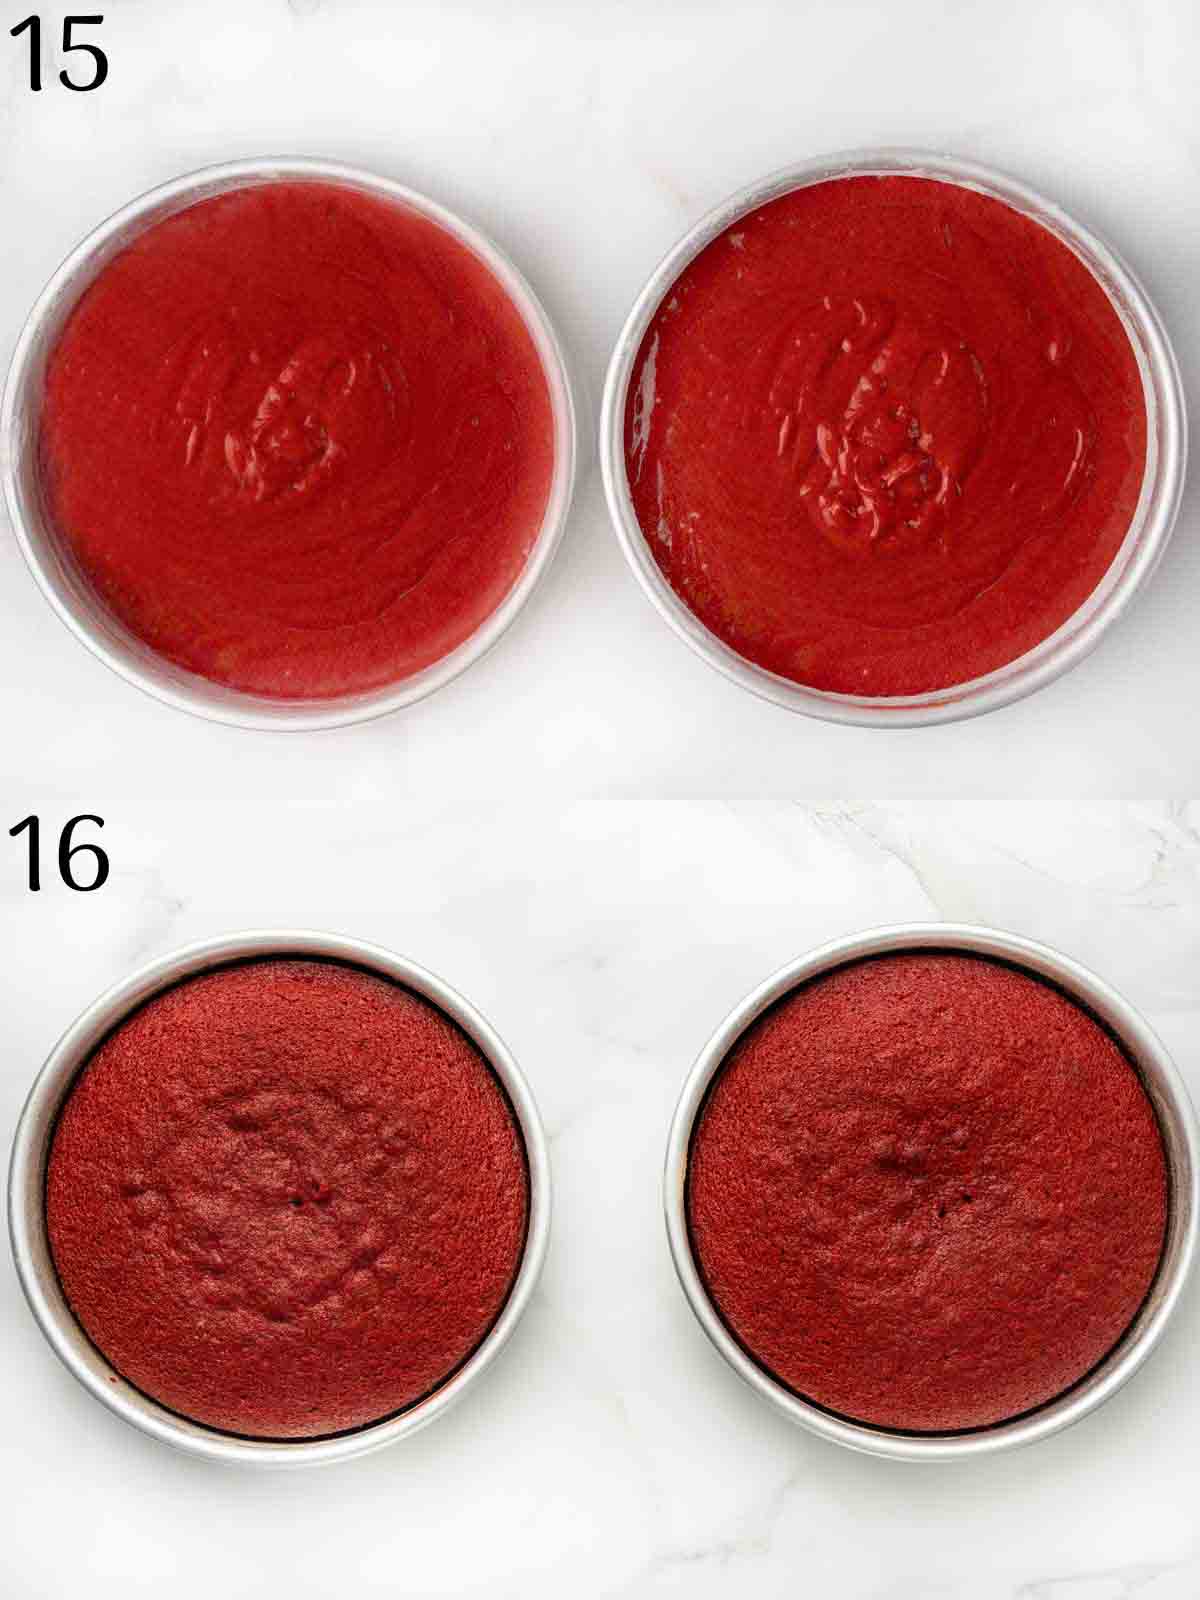 collage showing before and after baking